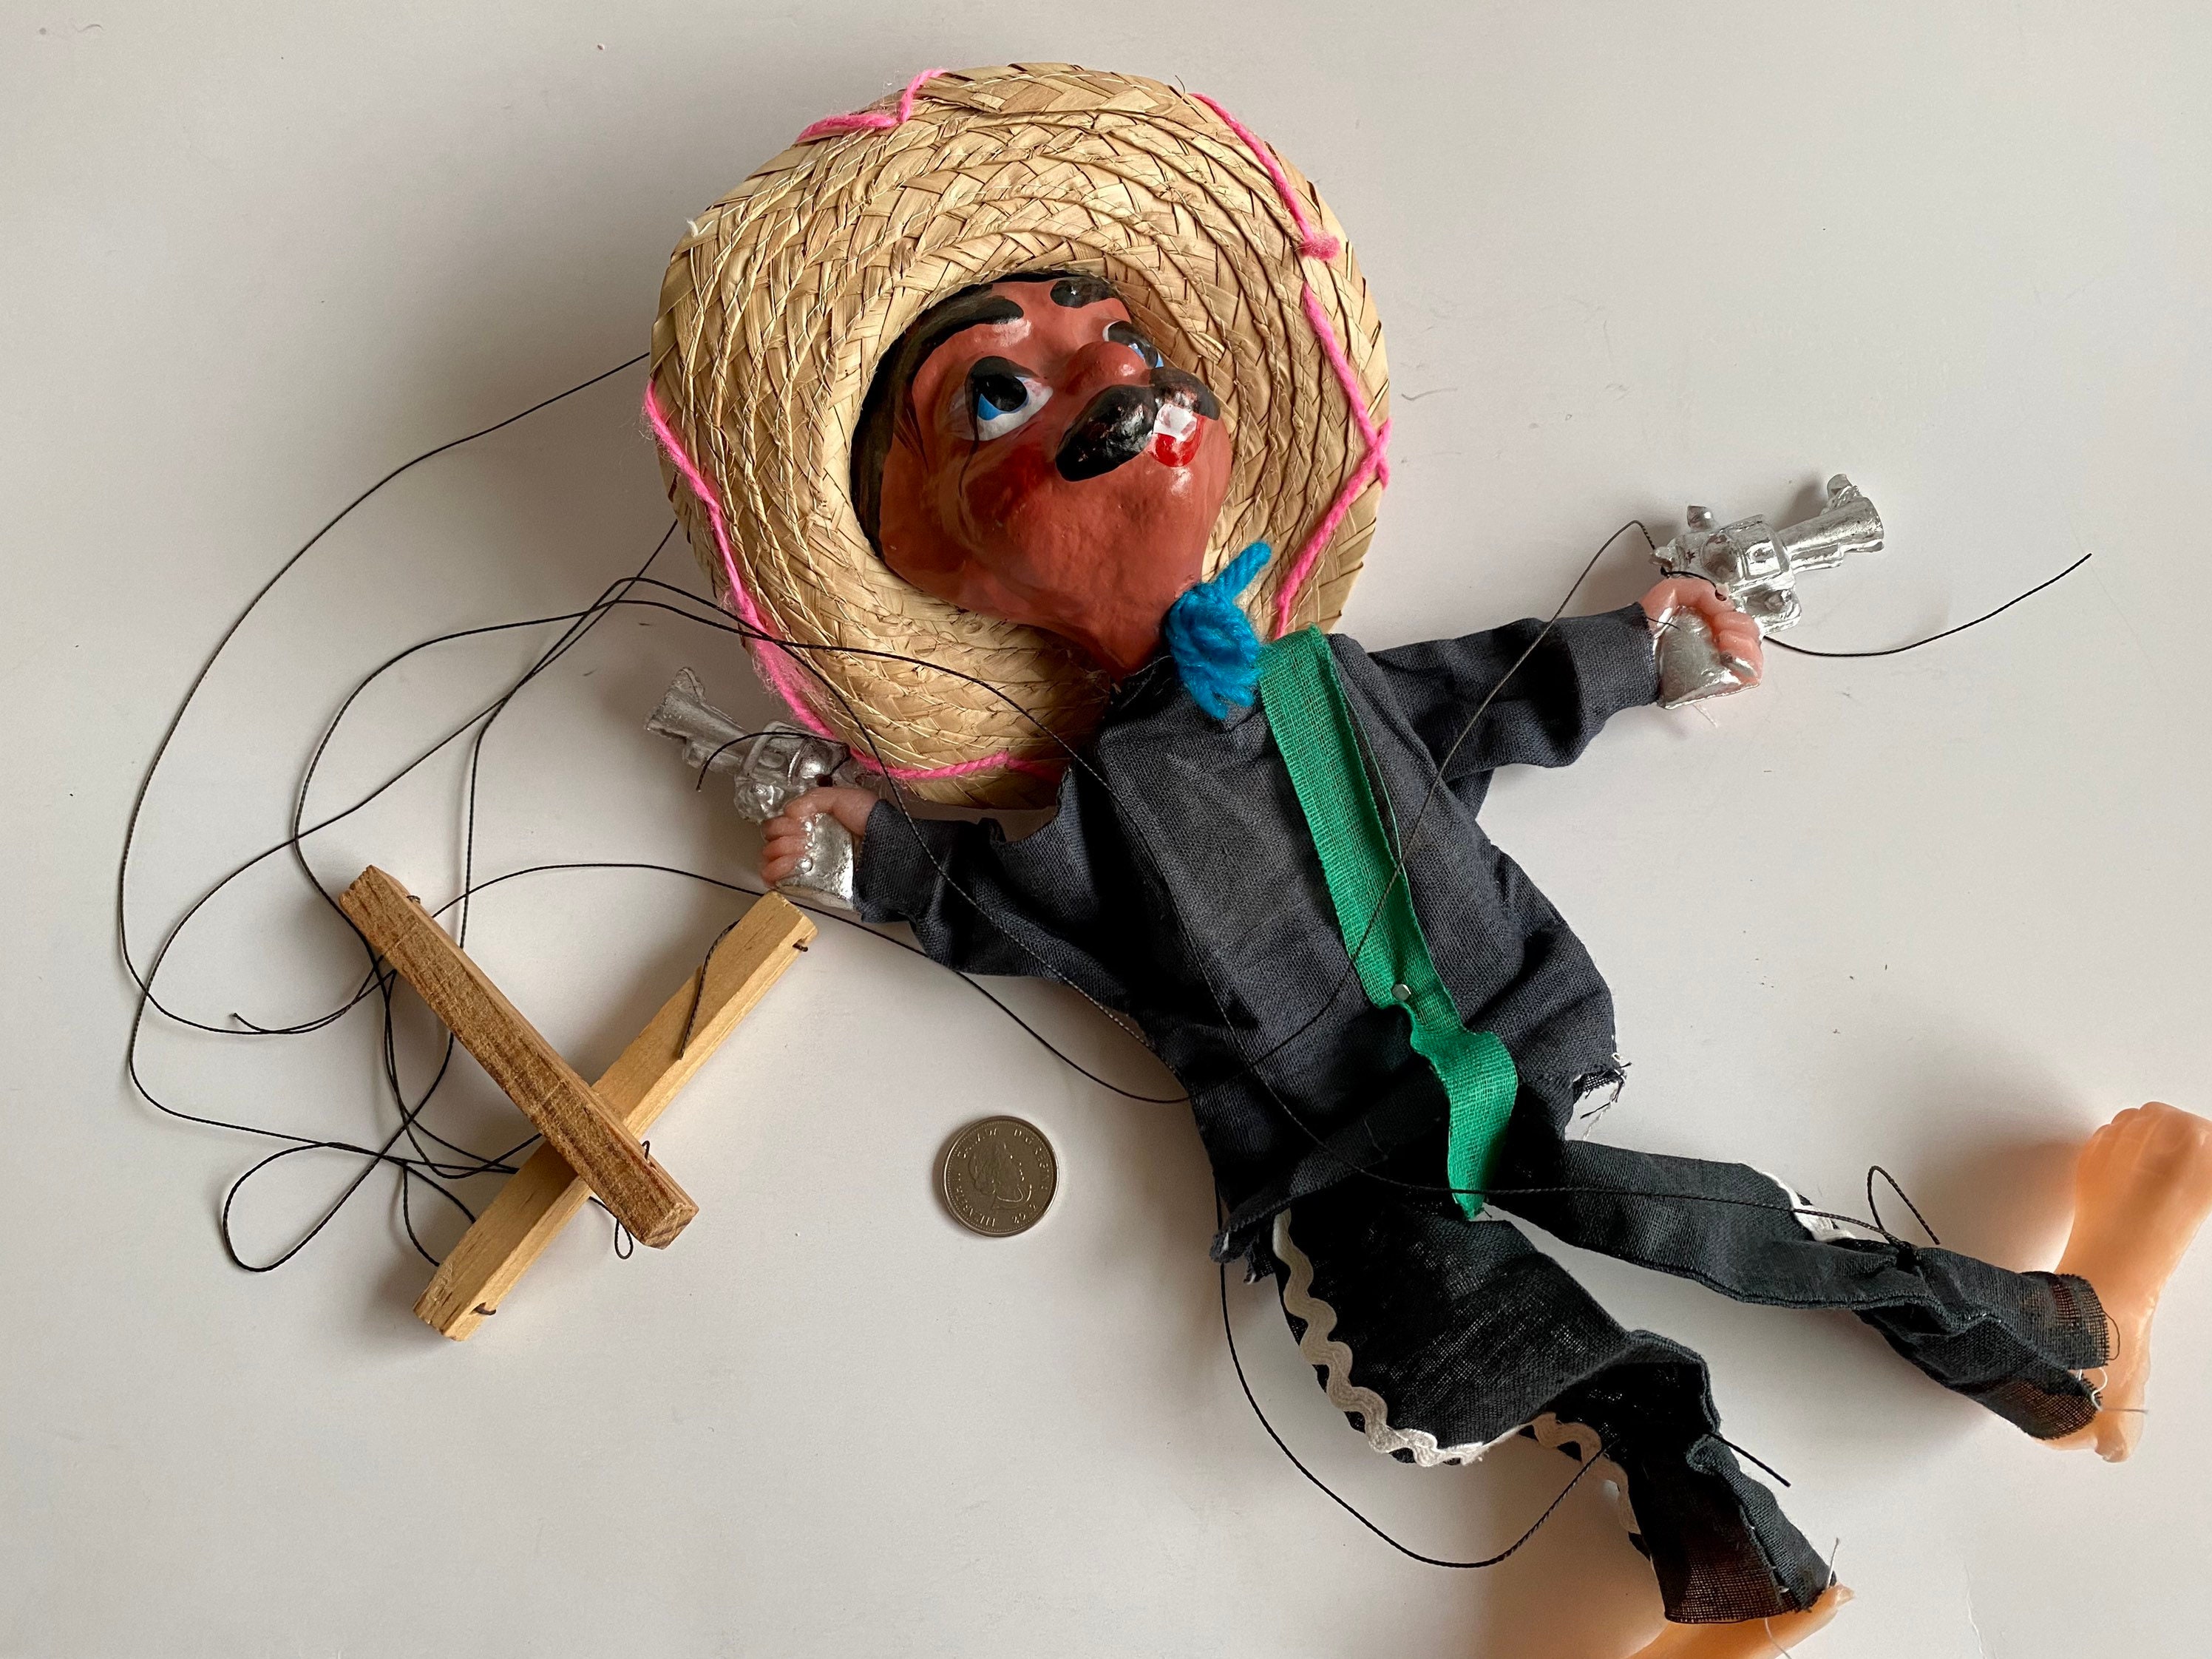 Leos Imports Mexican String Puppet Marionette Bandido w/Gun